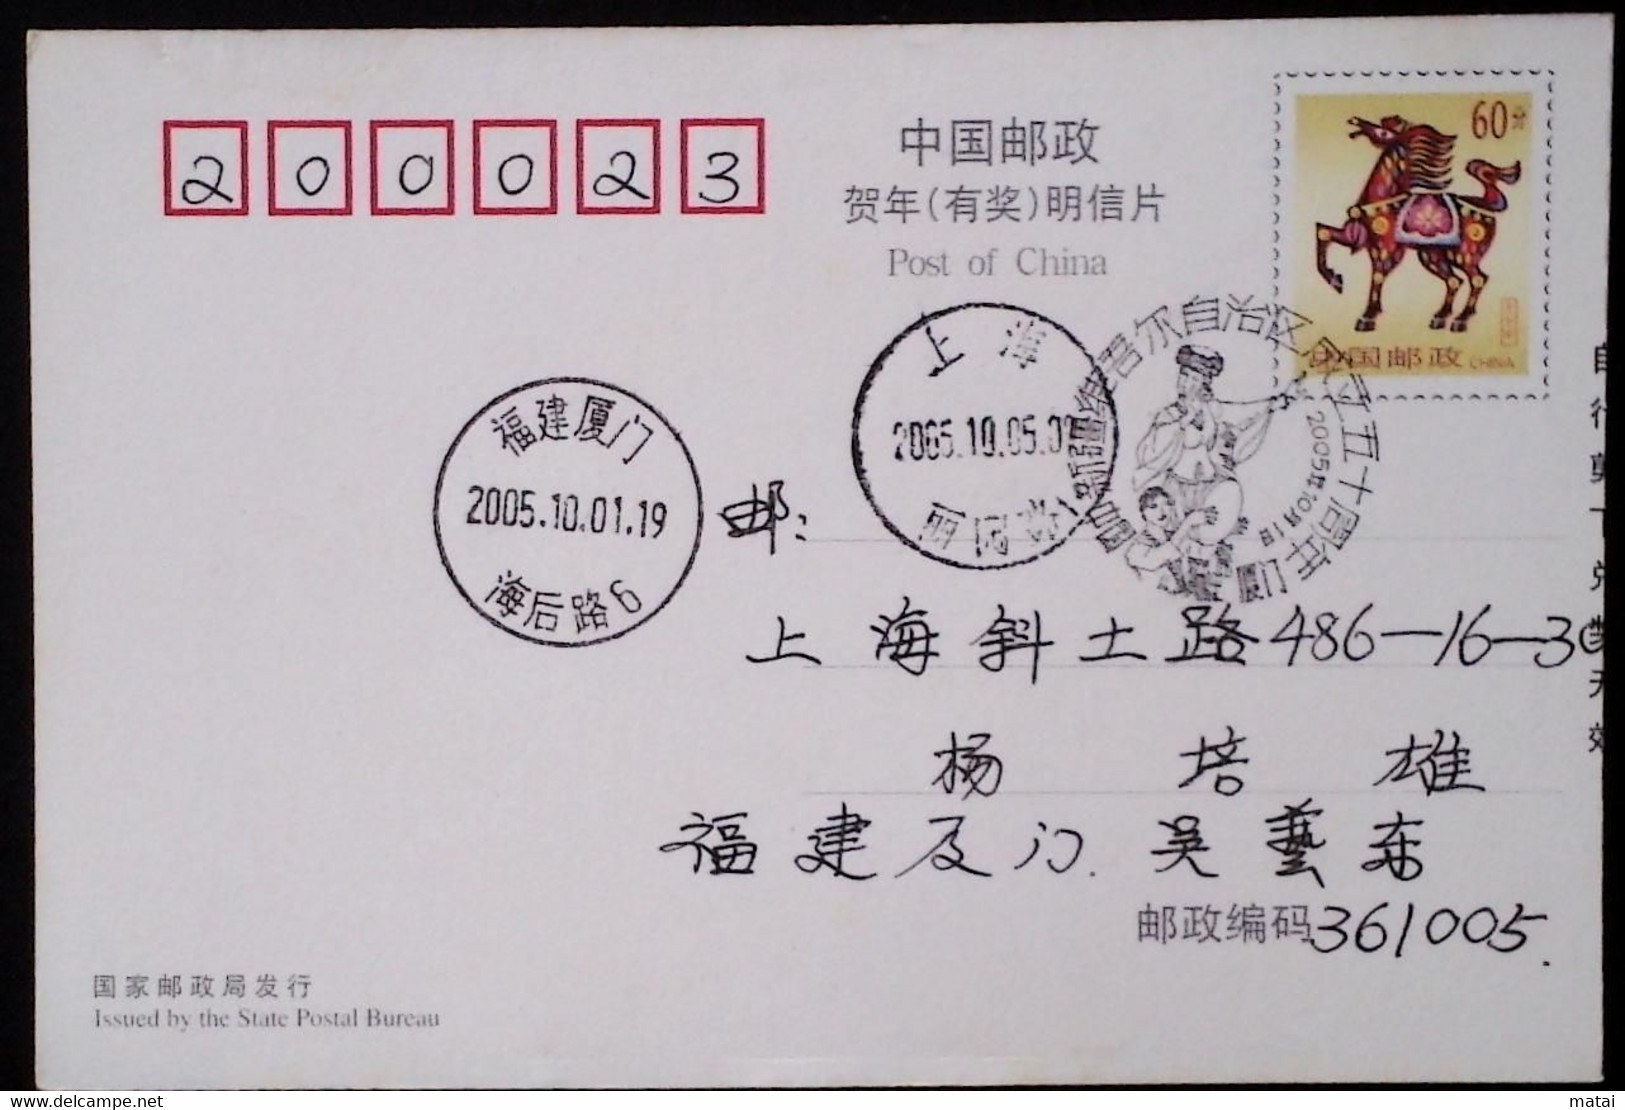 CHINA CHINE  CINA STAMPED  POSTCARD WITH SPECIAL POSTMARK - 88 - Usados